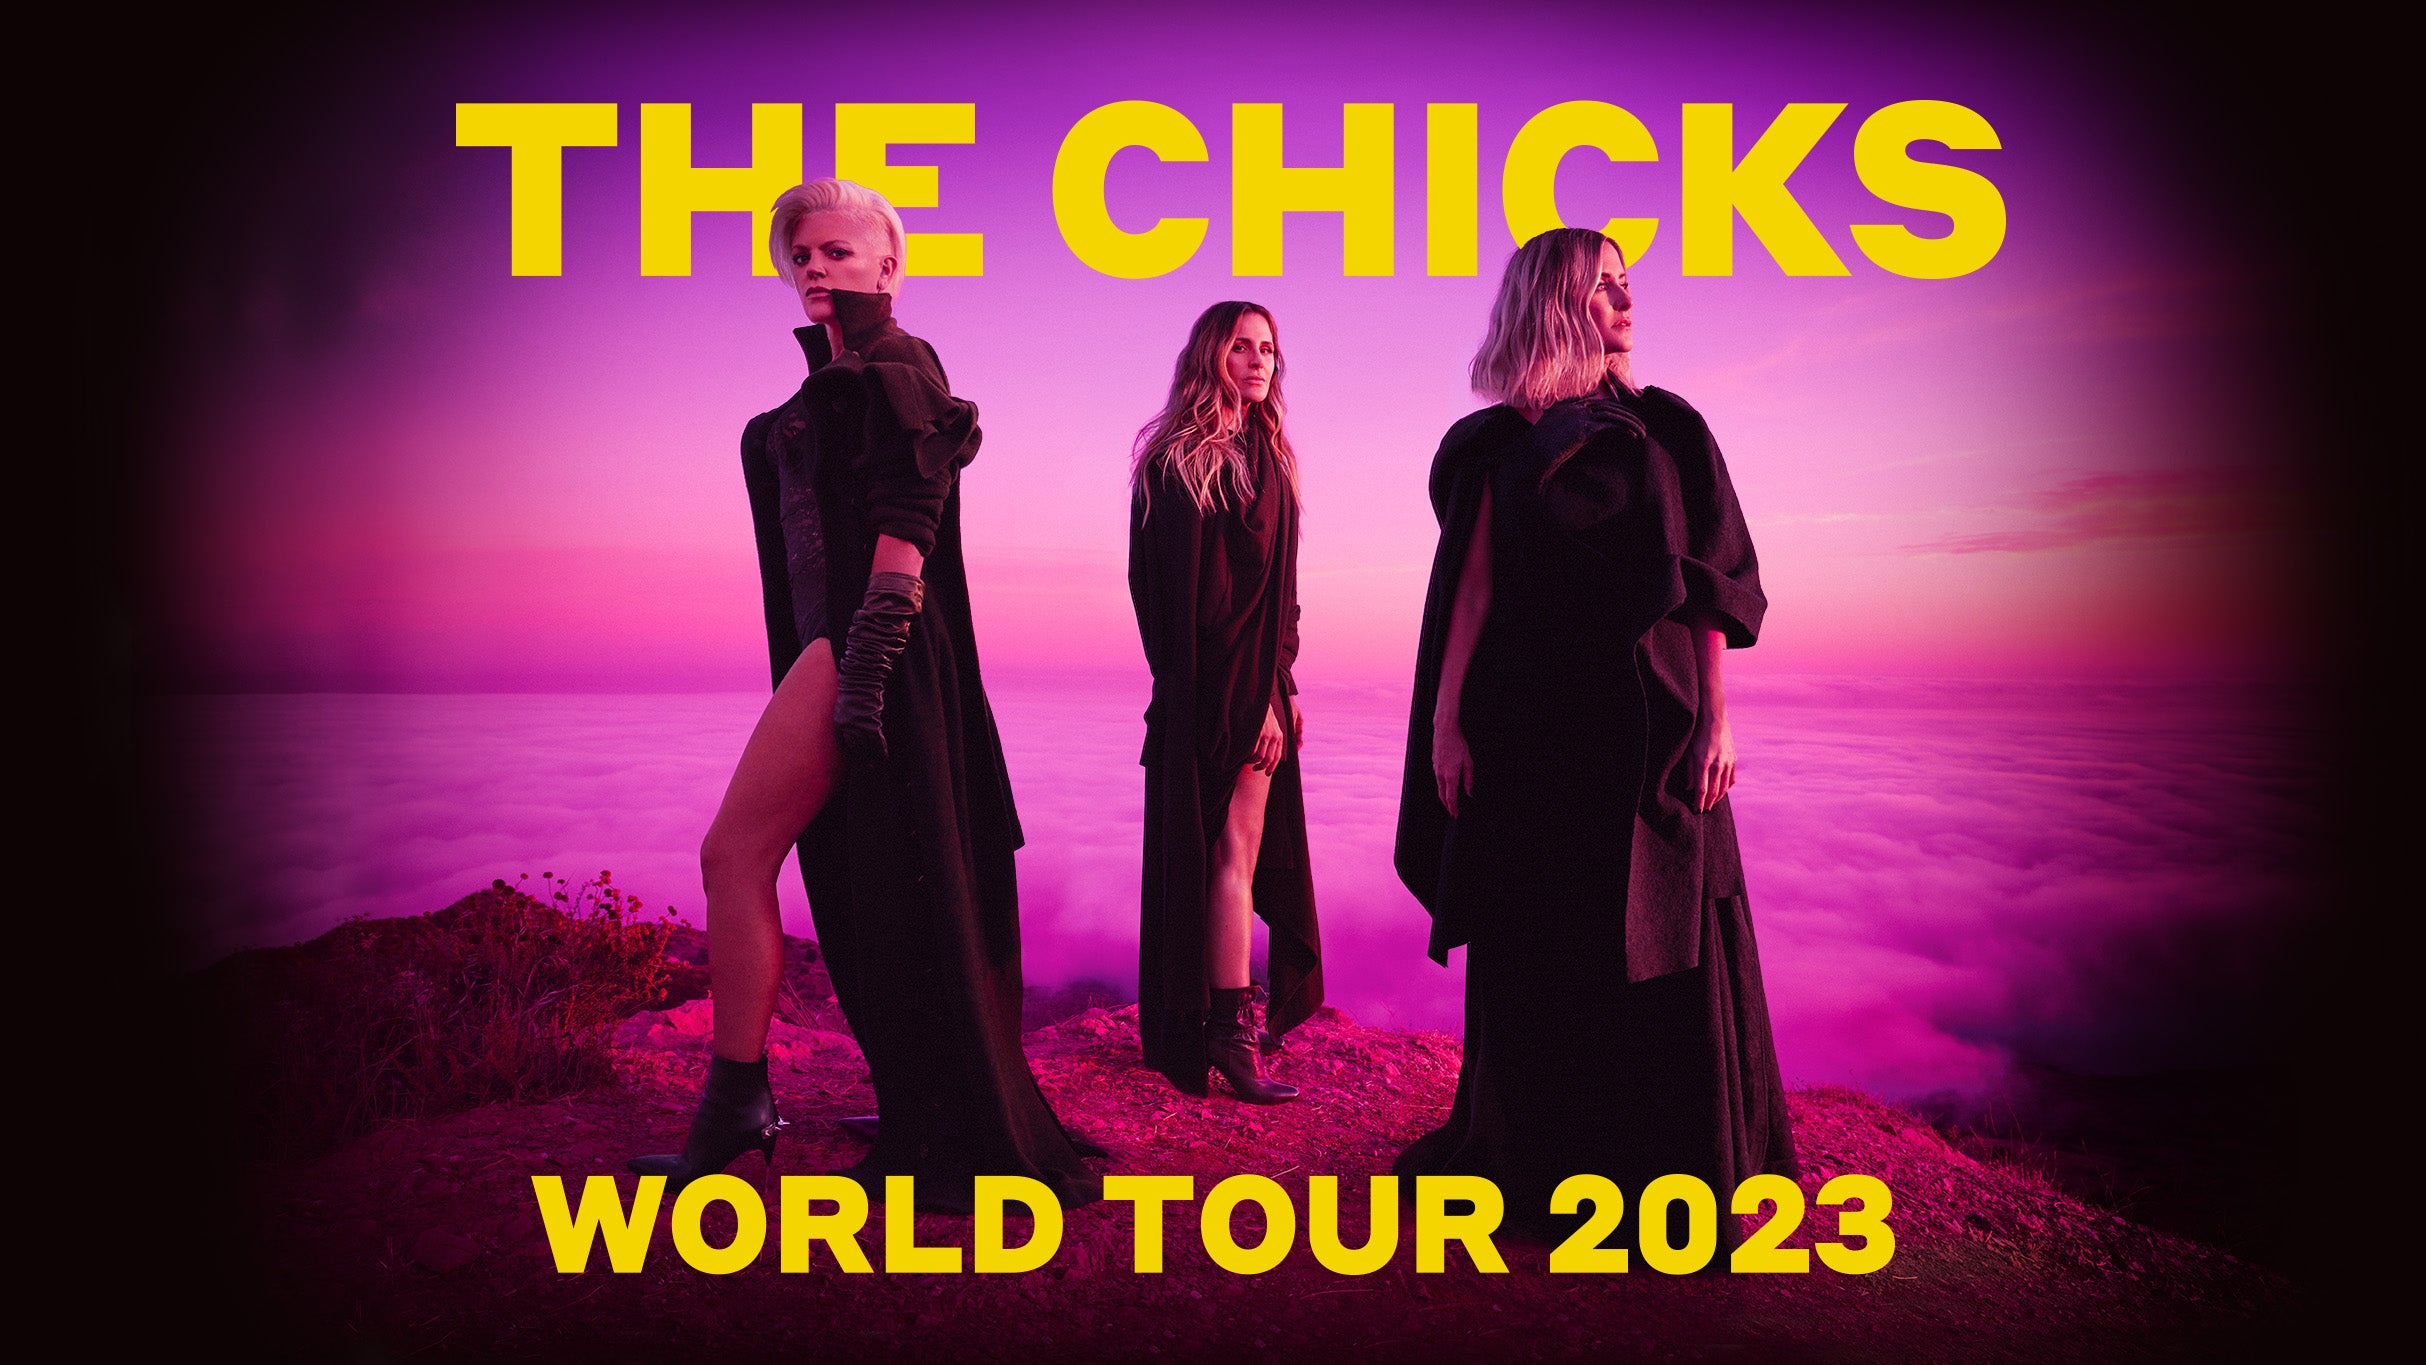 Image used with permission from Ticketmaster | a day on the green - The Chicks (Concert & Dining) tickets